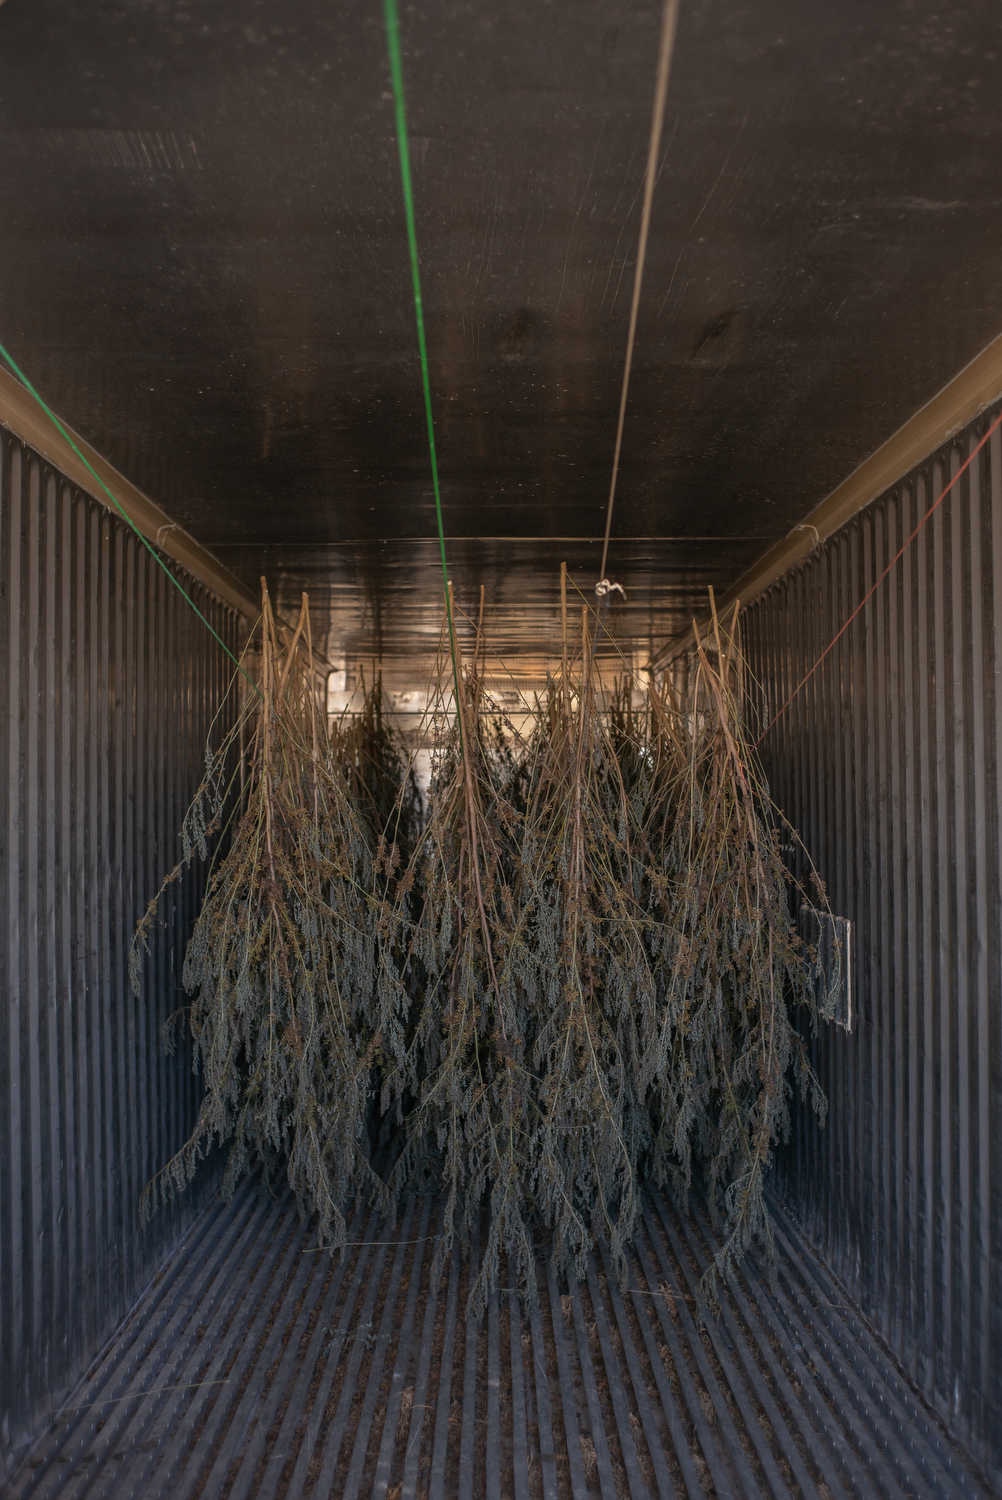 Harvested indigo leaves on stalks hanging upside down to dry, inside a storage container at Ogee Farms in Johns Island, South Carolina. Ellie Maas Davis, who runs the farm, had been experimenting with different methods of processing indigo, including first drying out indigo stalks.